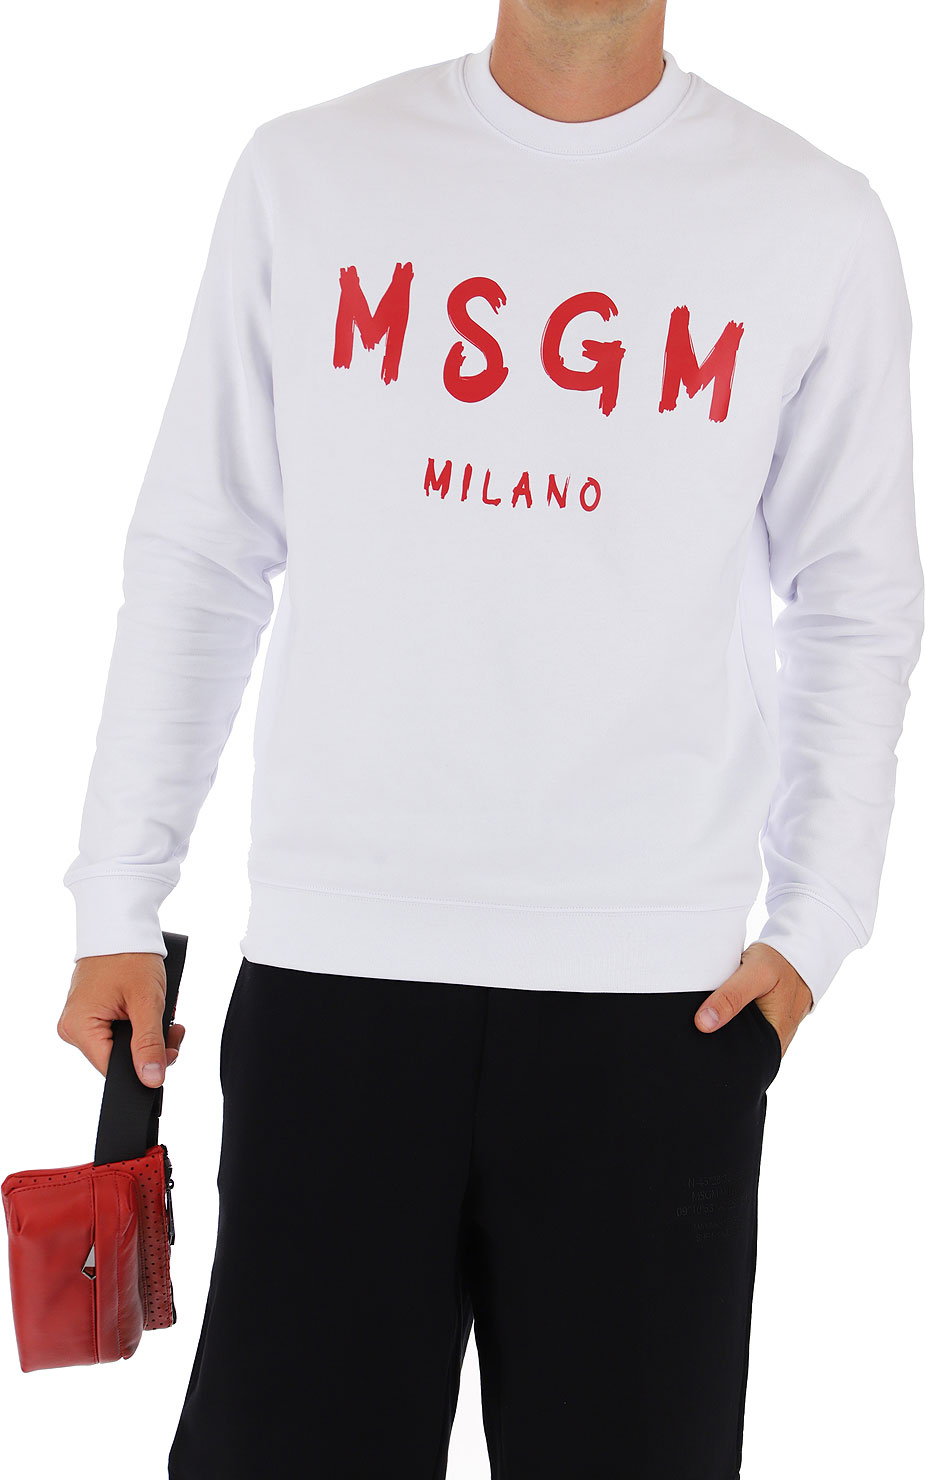 Mens Clothing MSGM, Style code: 3140mm513-217599-01